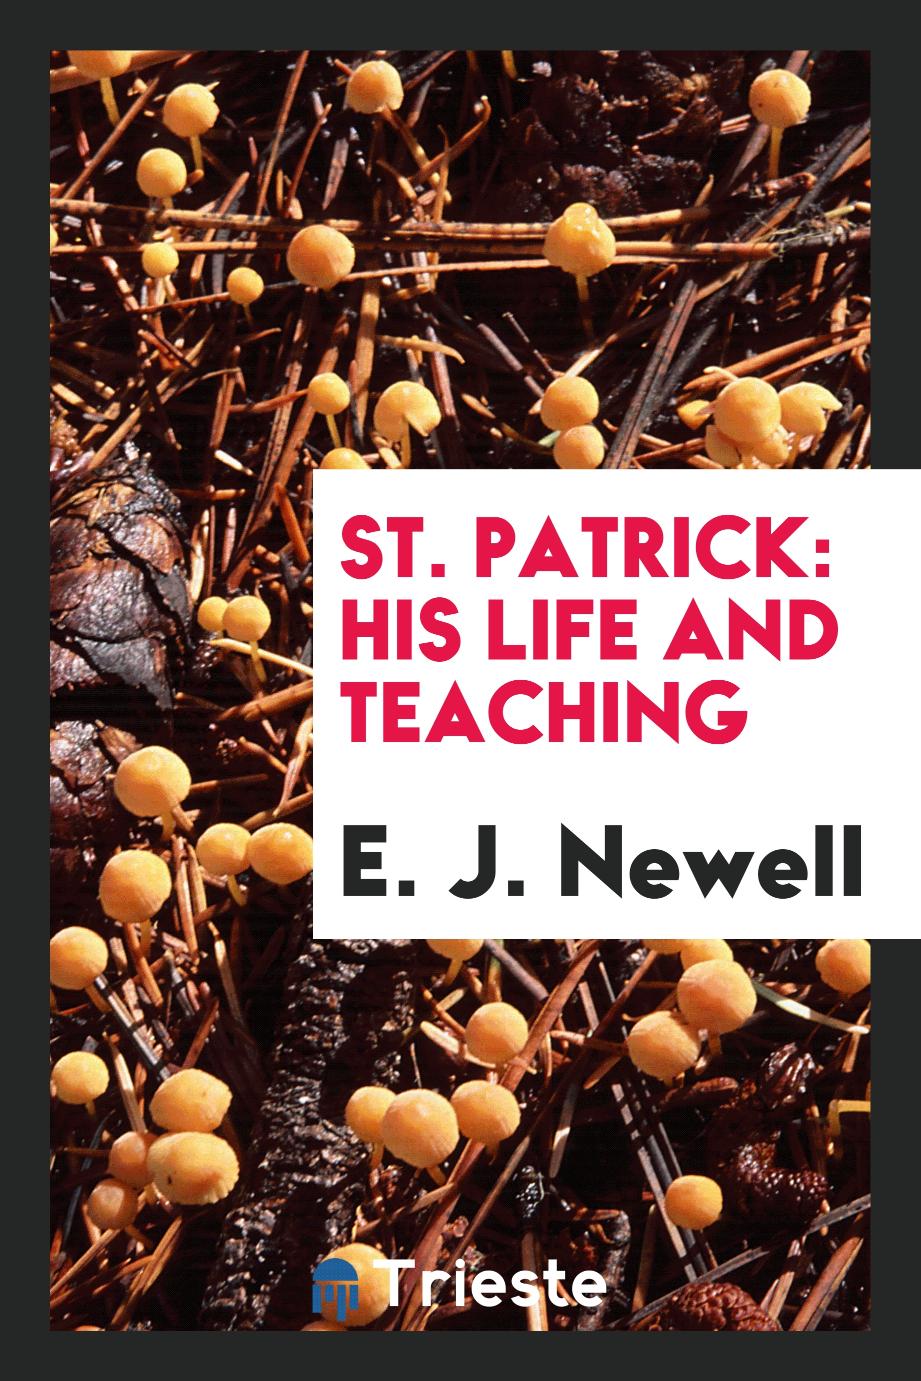 St. Patrick: his life and teaching